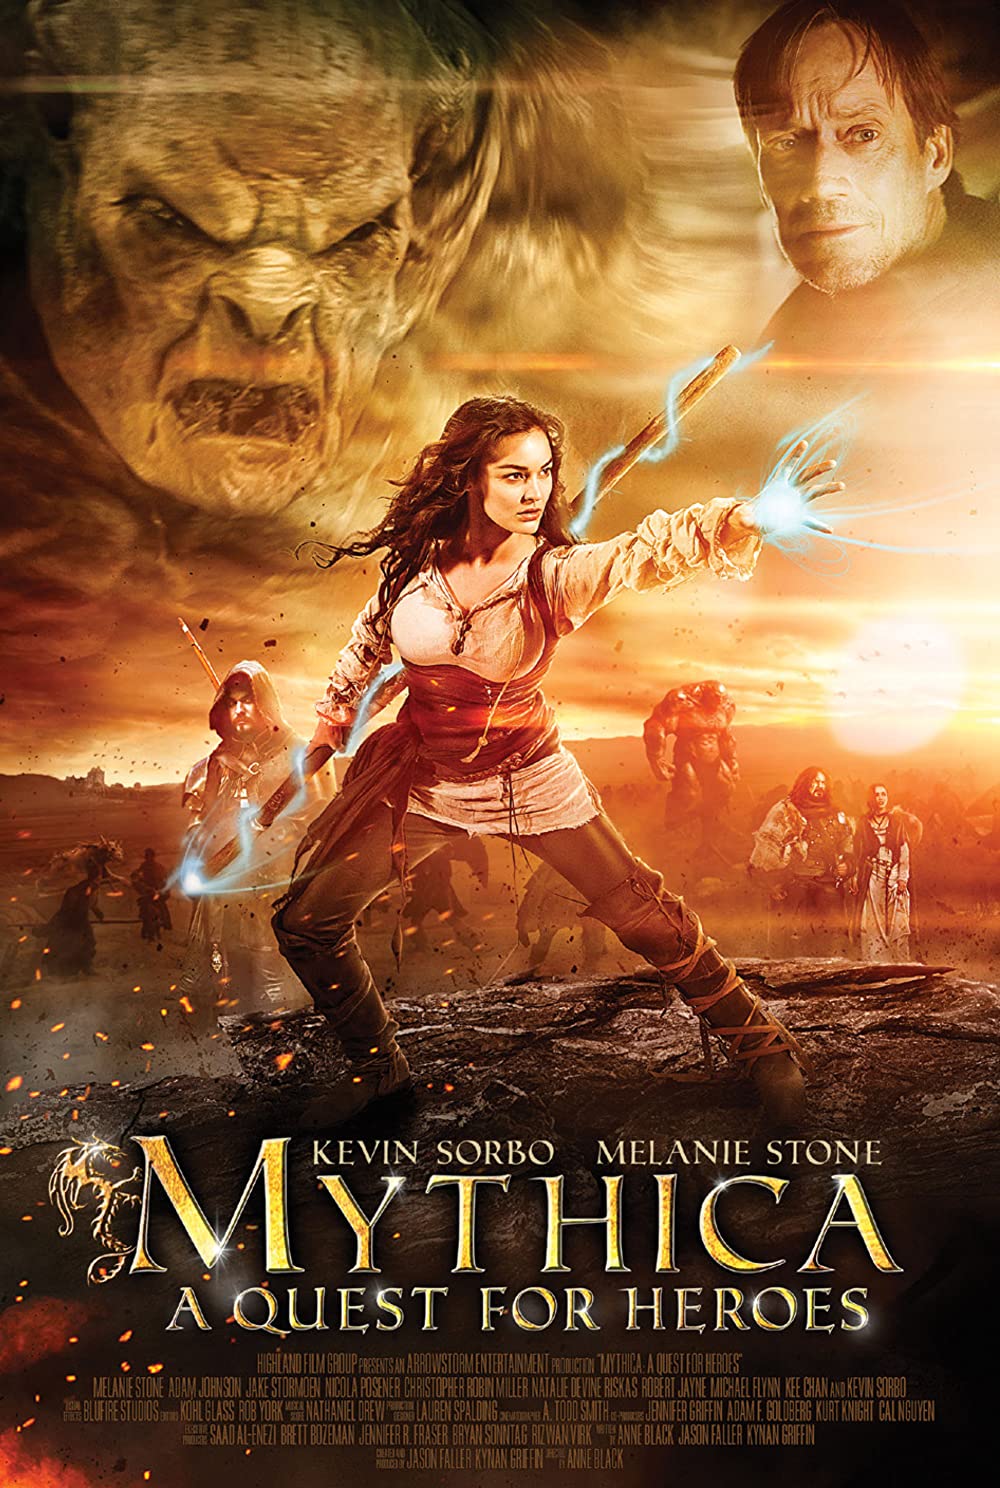 Mythica A Quest for Heroes (2014) Hindi Dubbed ORG 480p BluRay x264 ESub 300MB Download